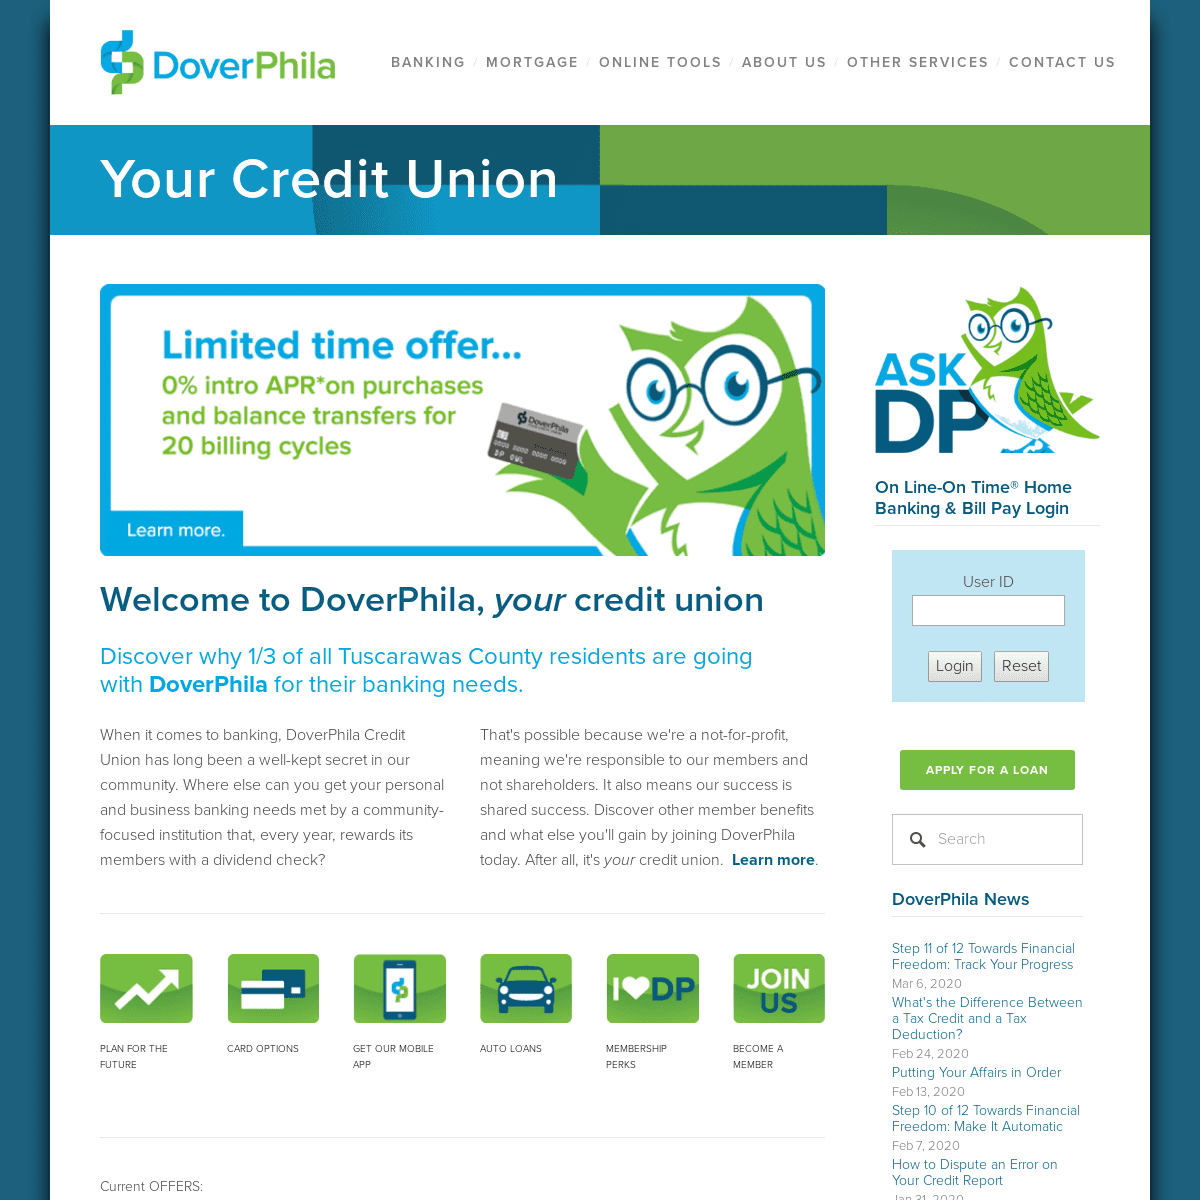 A complete backup of dpfcu.org